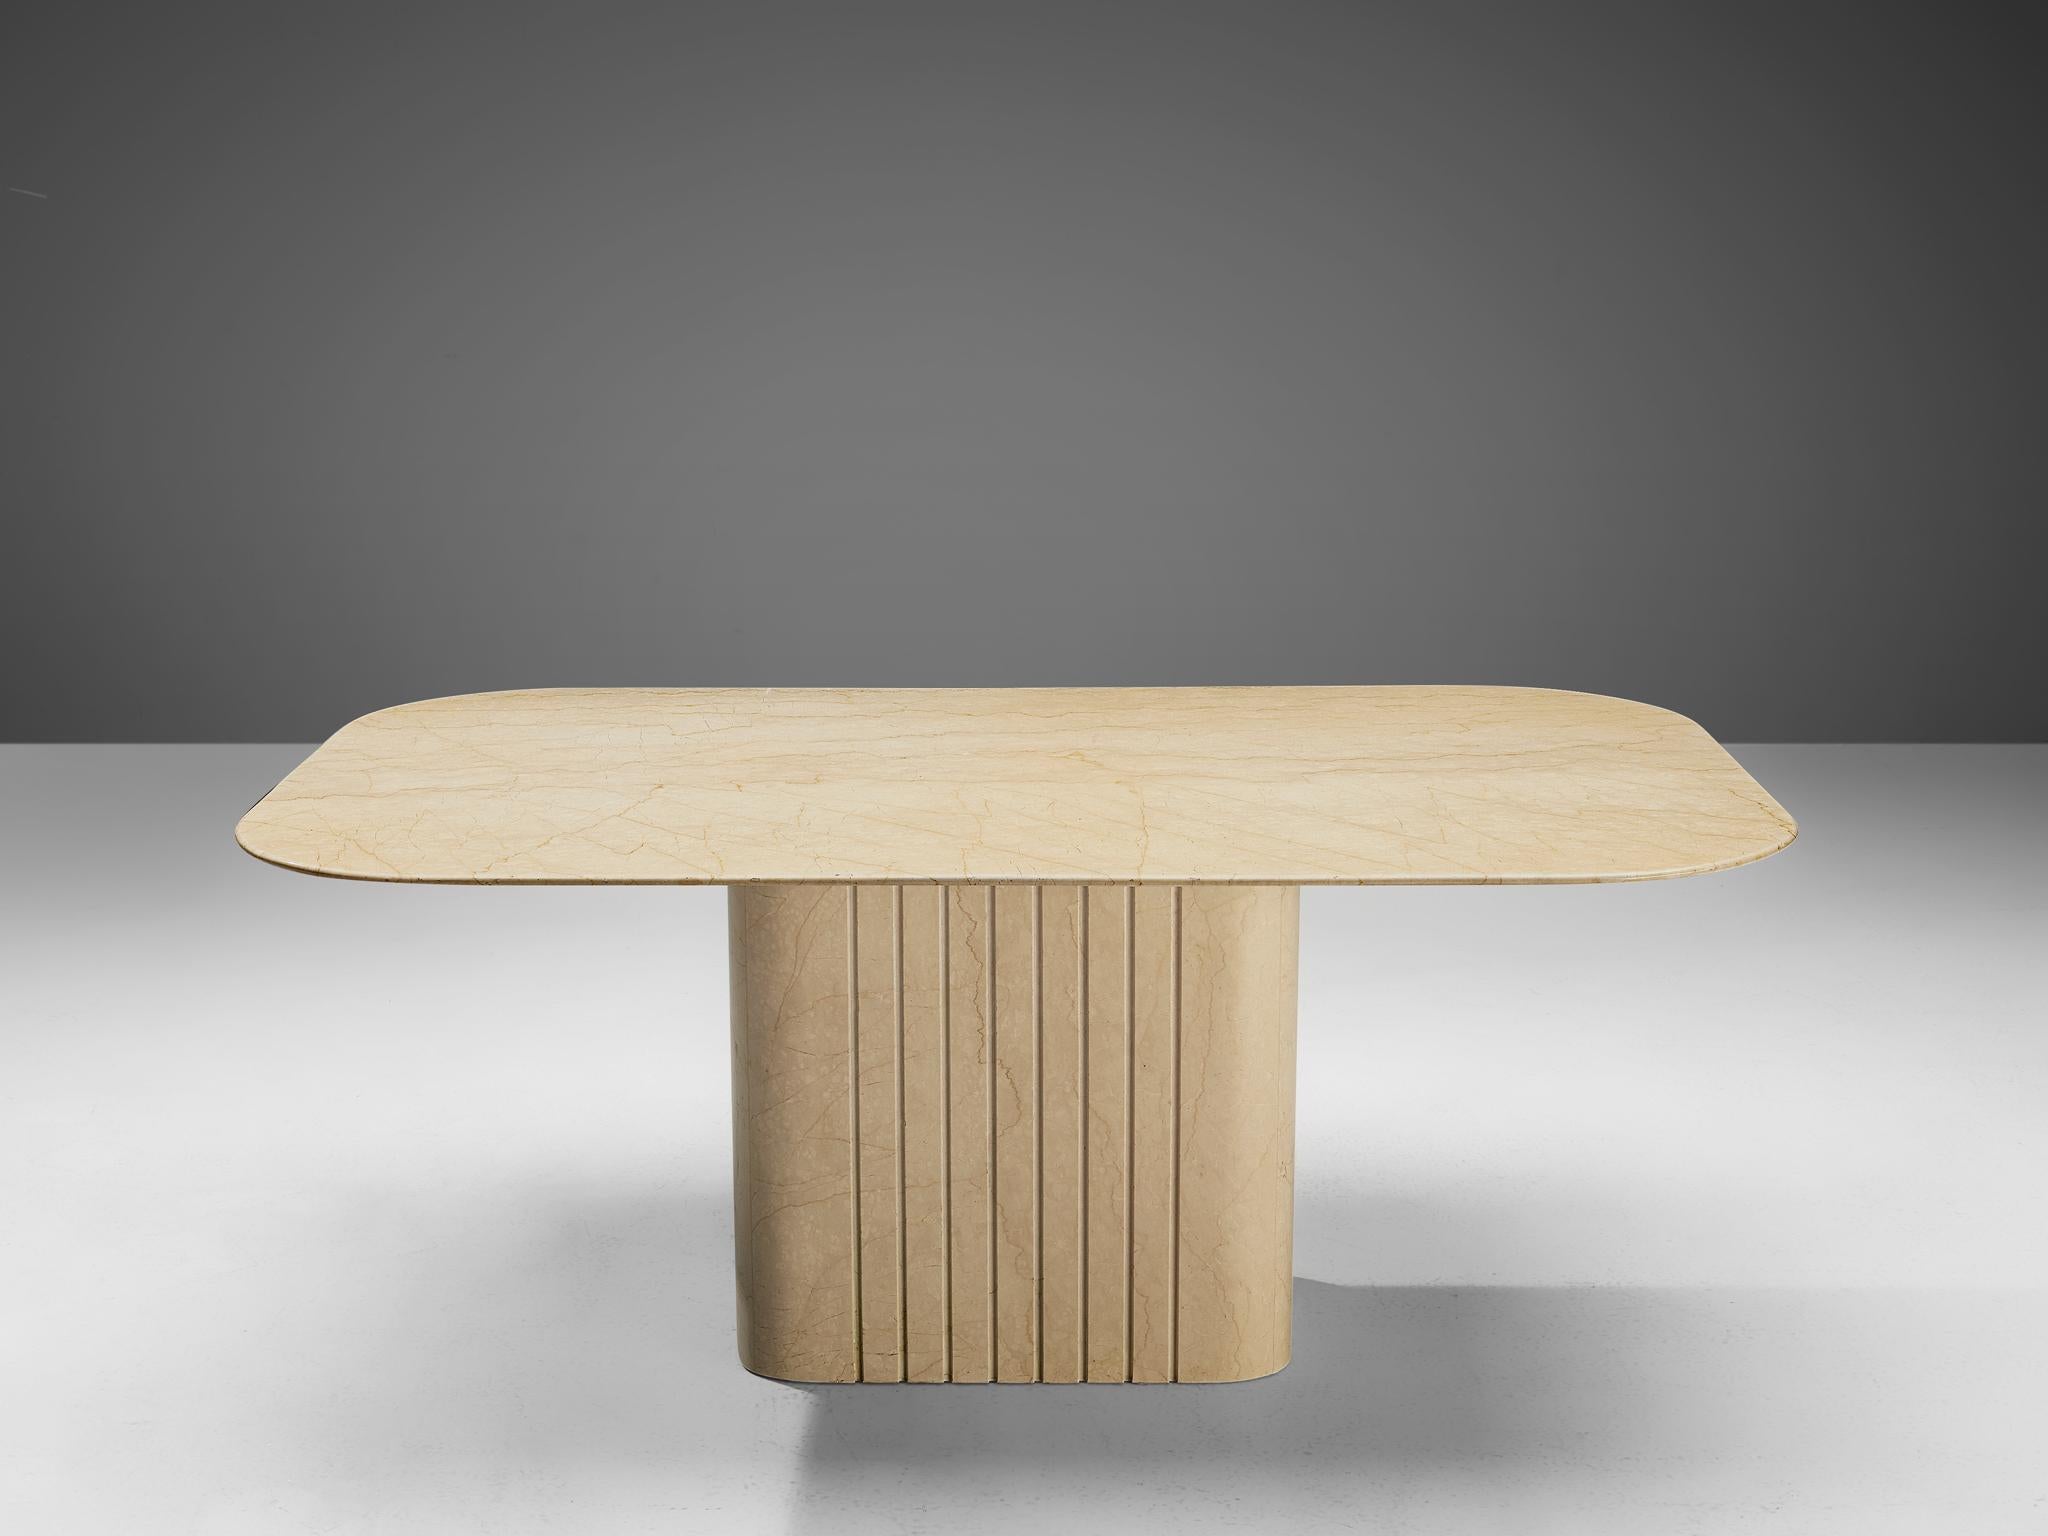 Dining table, travertine, Italy, 1970s

The designer created an eccentric table with a certain monochrome, sculptural look, which is achieved by exclusively using travertine, a natural stone from Italy. The body holds an intricate construction and